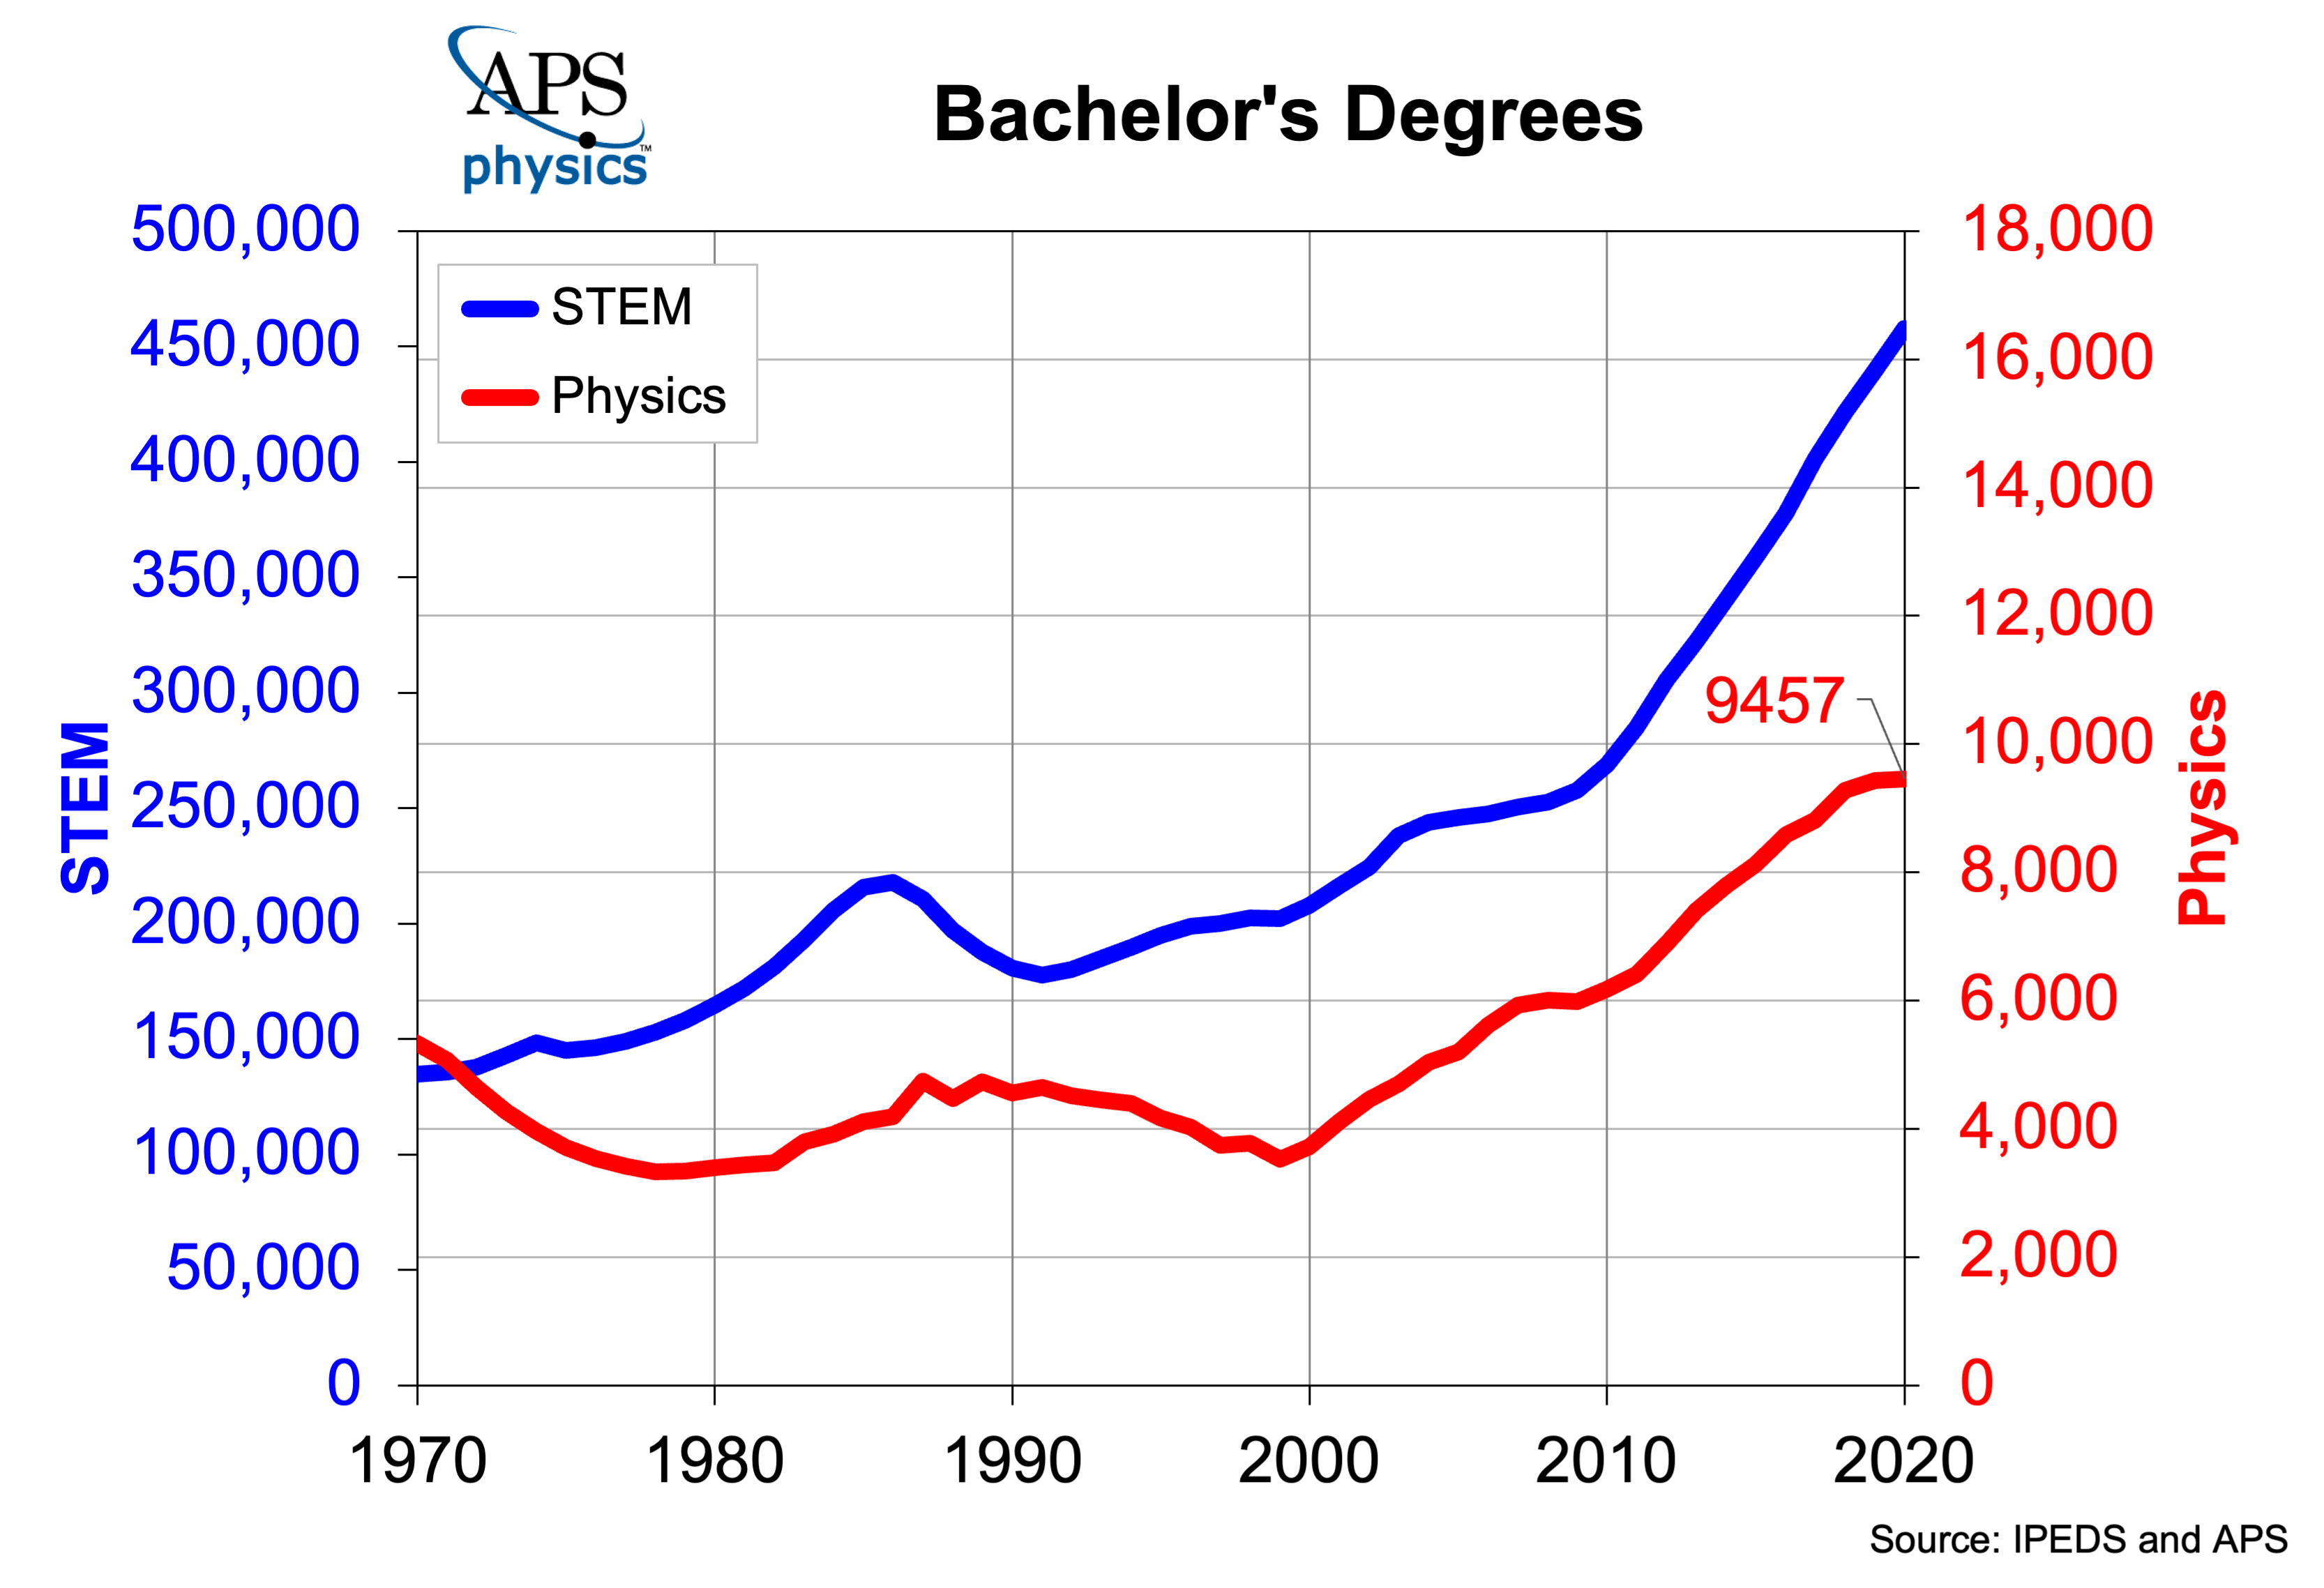 Bachelor's Degree in Physics and STEM 2020 graph